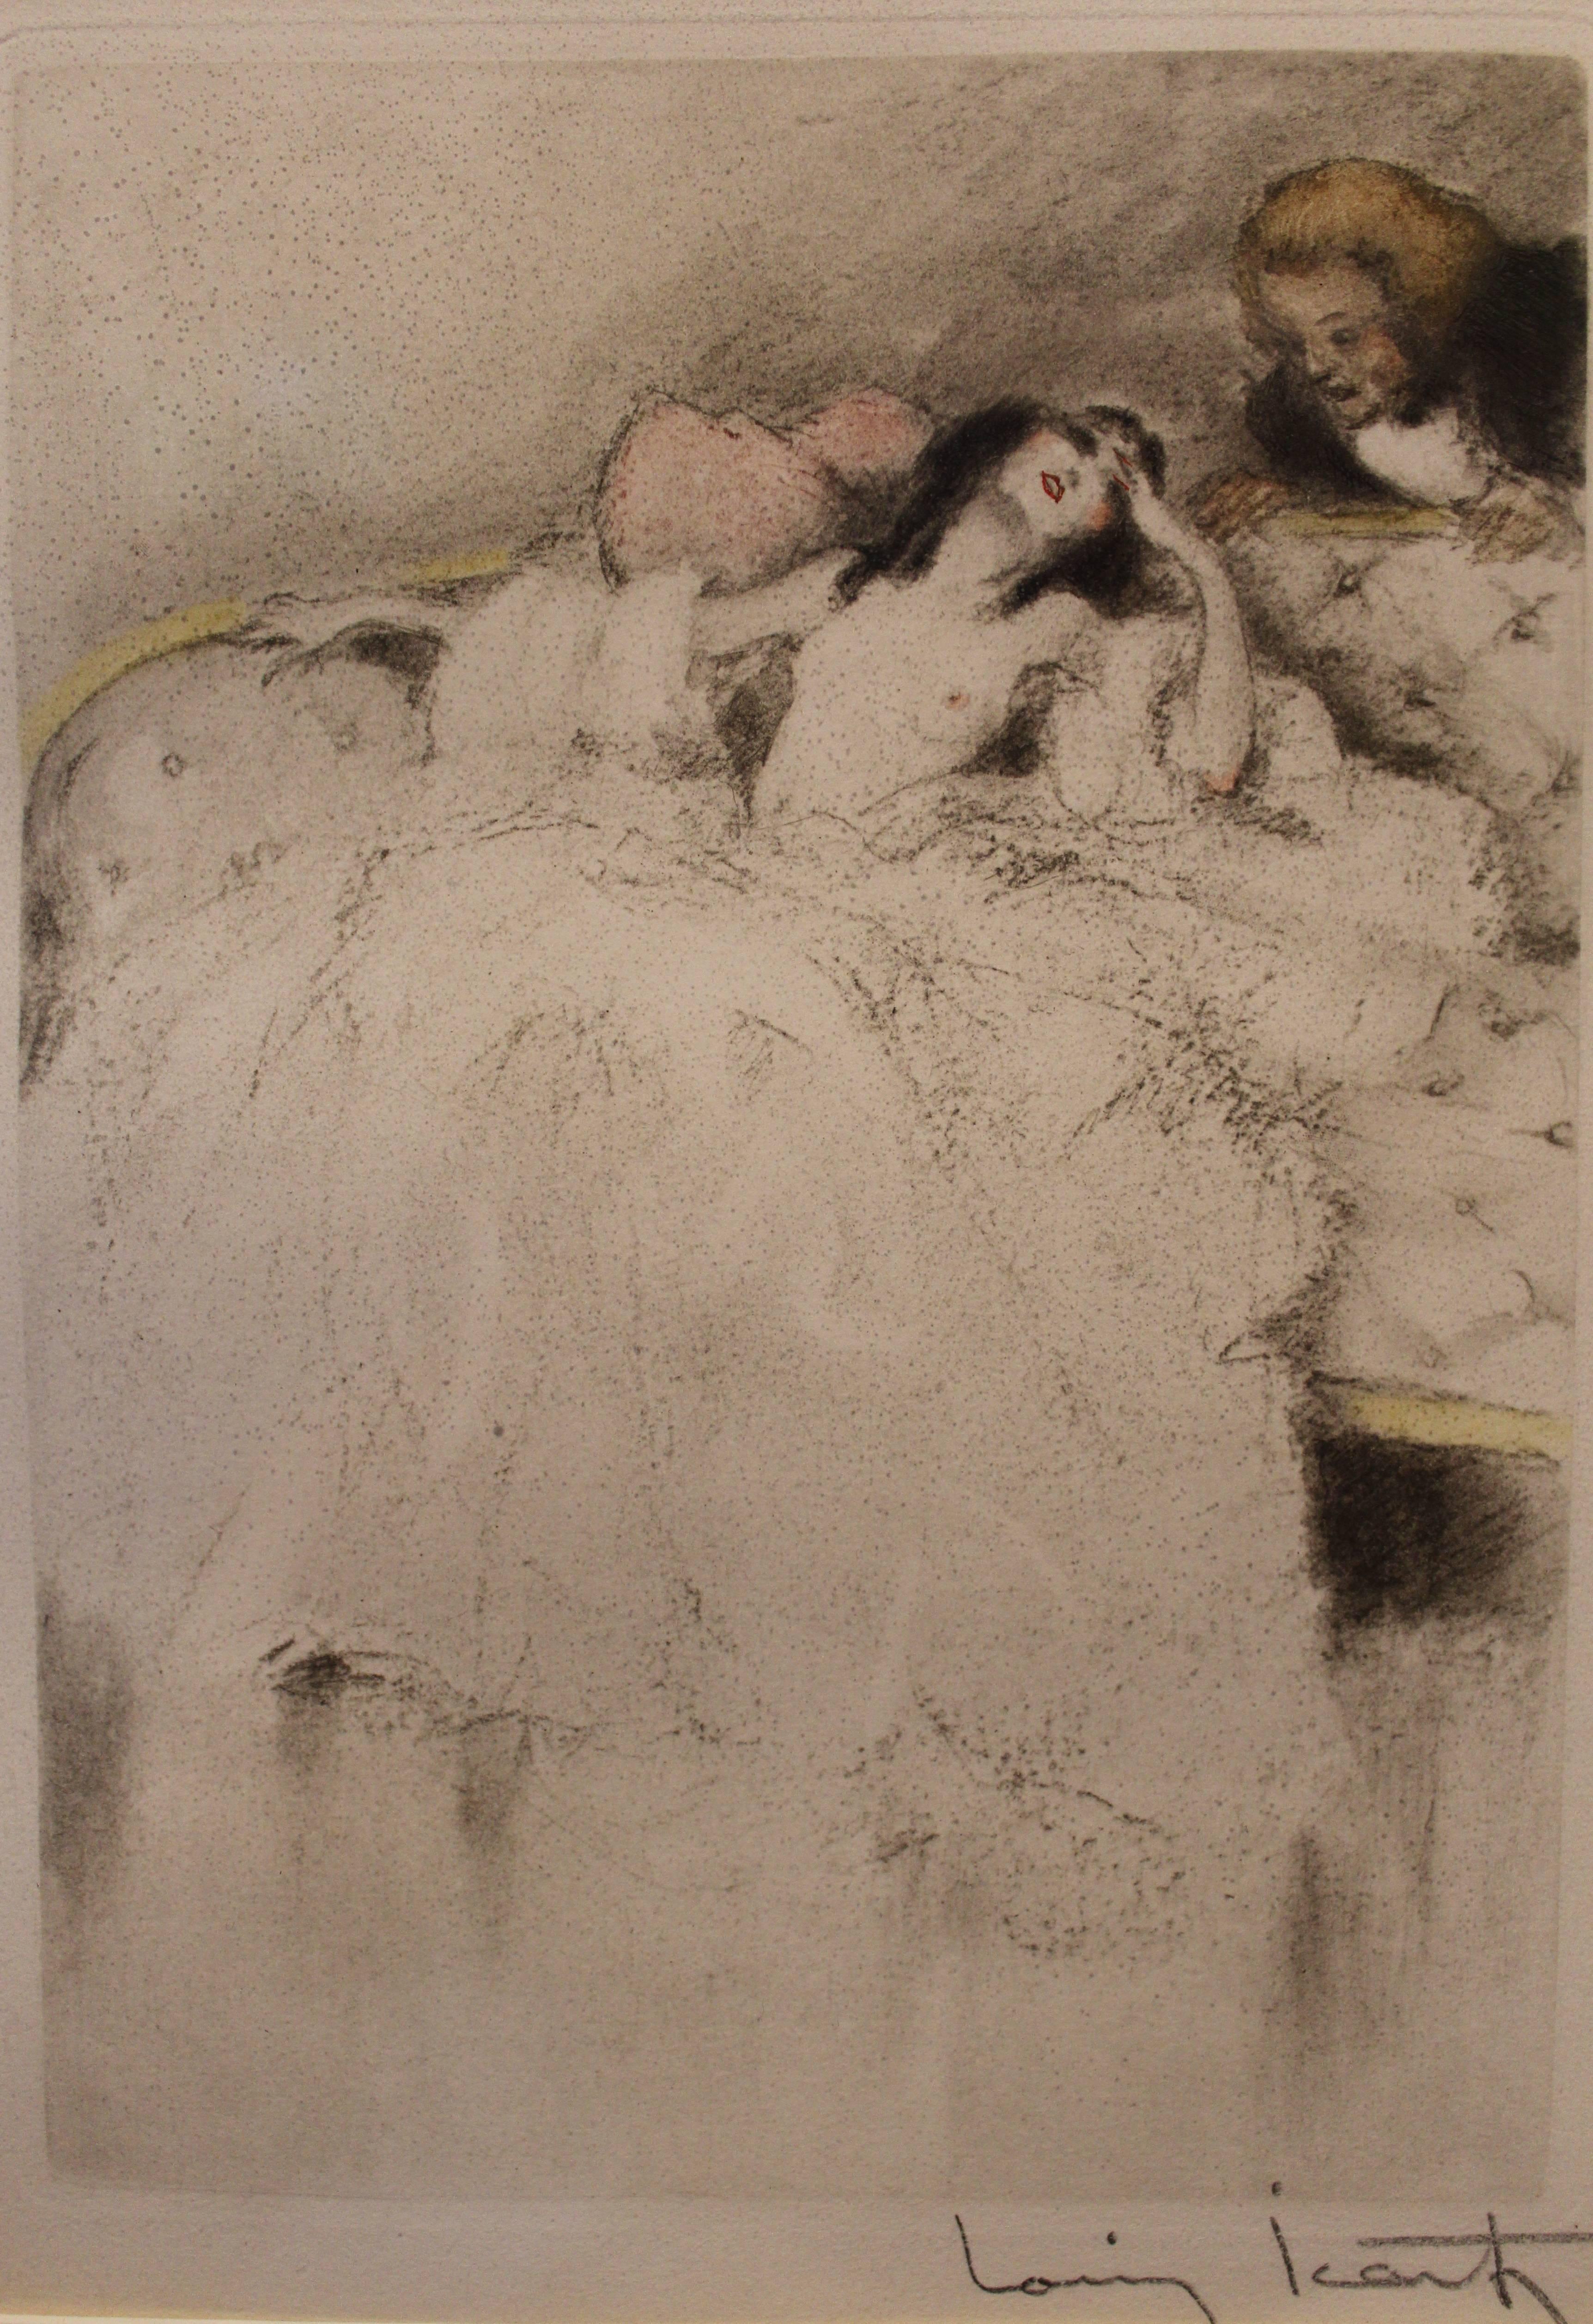 Three Louis Icart erotic color engraving etching, circa 1938. Pencil signed lower right margin. Plate measures: 8